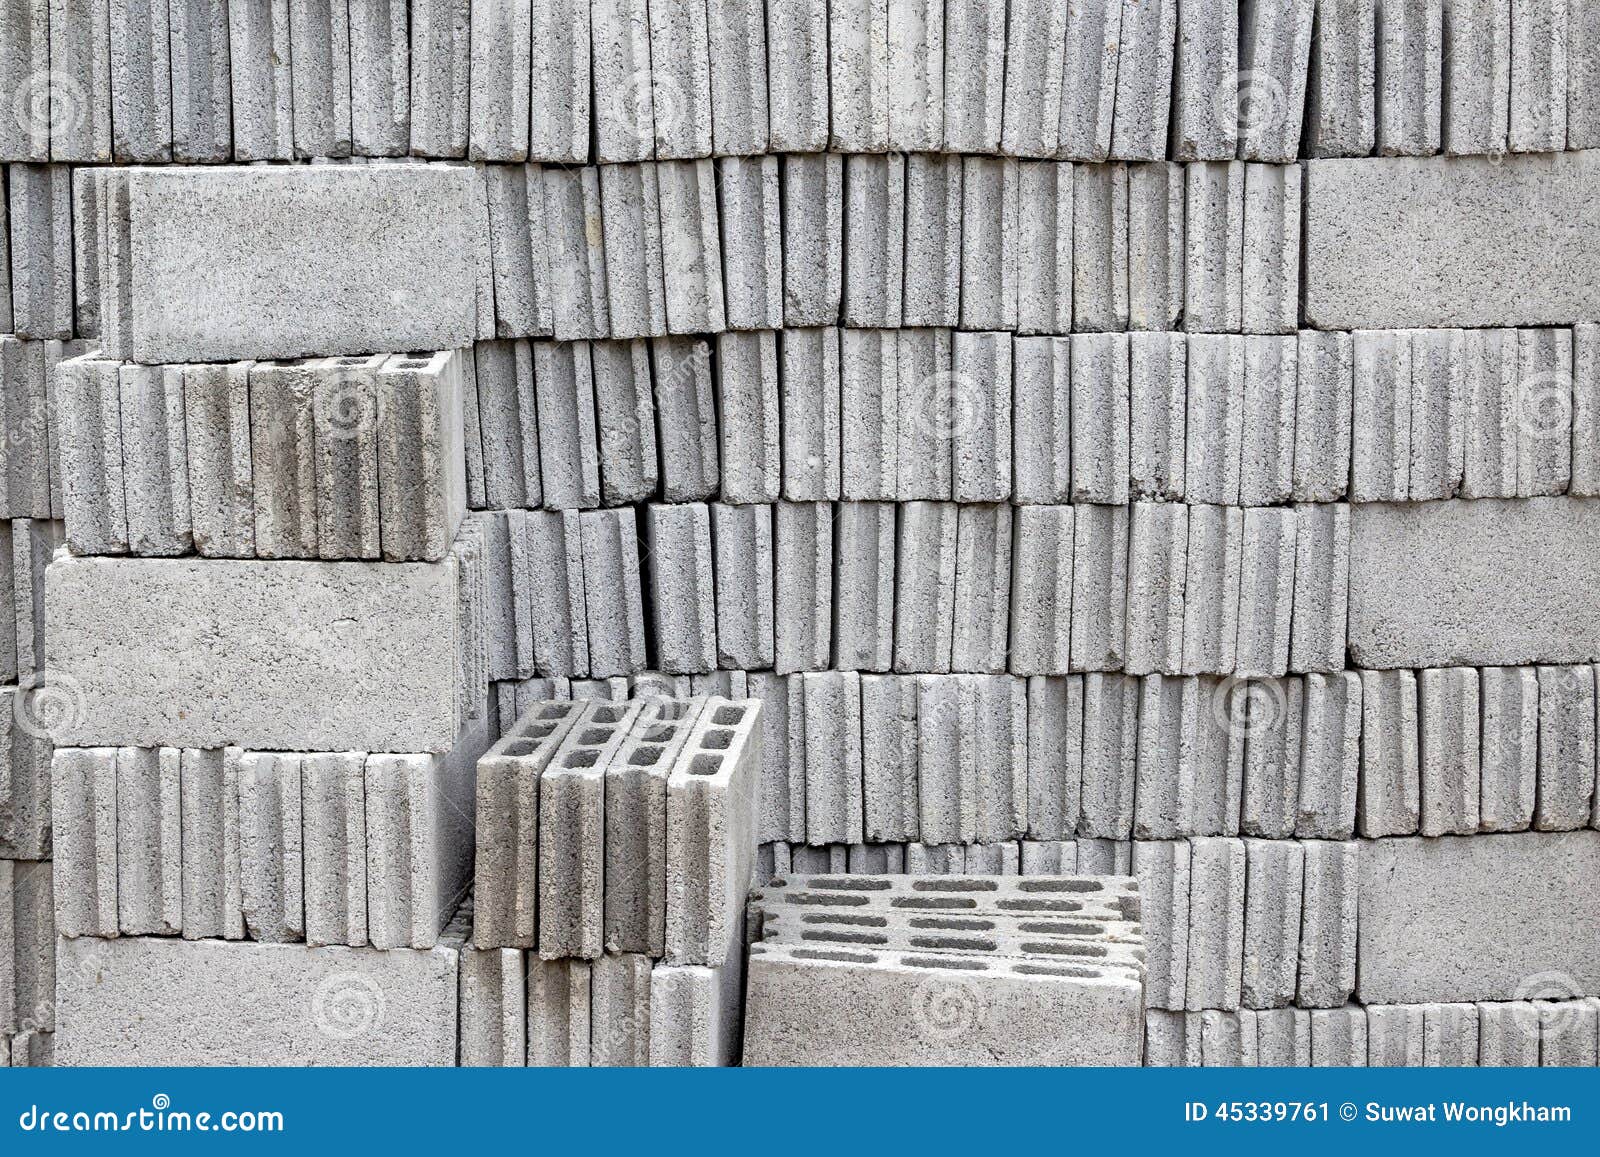 Cement block texture stock image. Image of industrial - 45339761